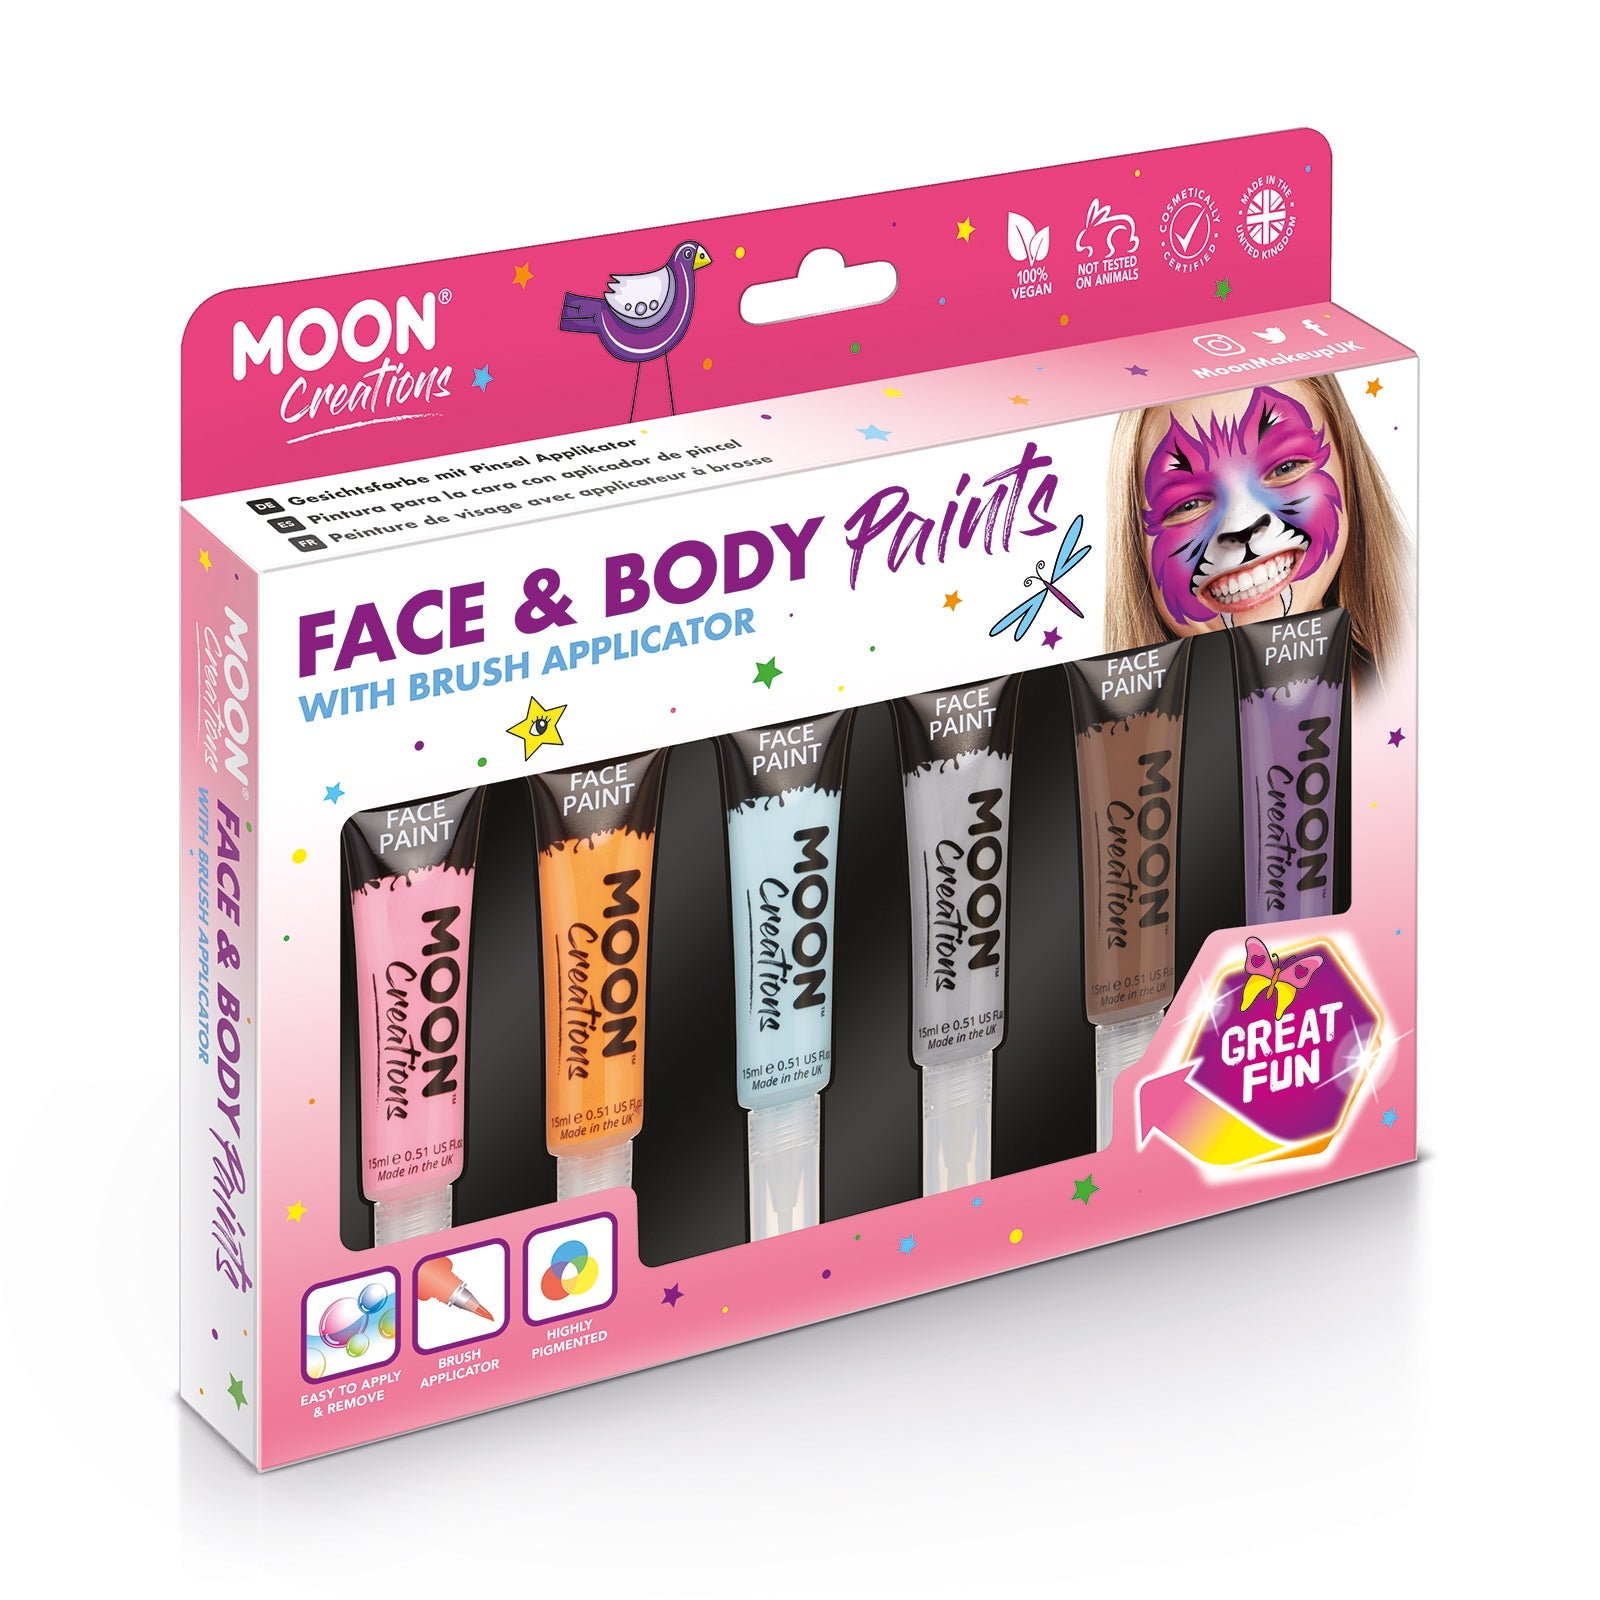 Face & Body Paint Makeup w/brush Adventure Colours Boxset - 6 tubes, brush, spo. Cosmetically certified, FDA & Health Canada compliant, cruelty free and vegan.